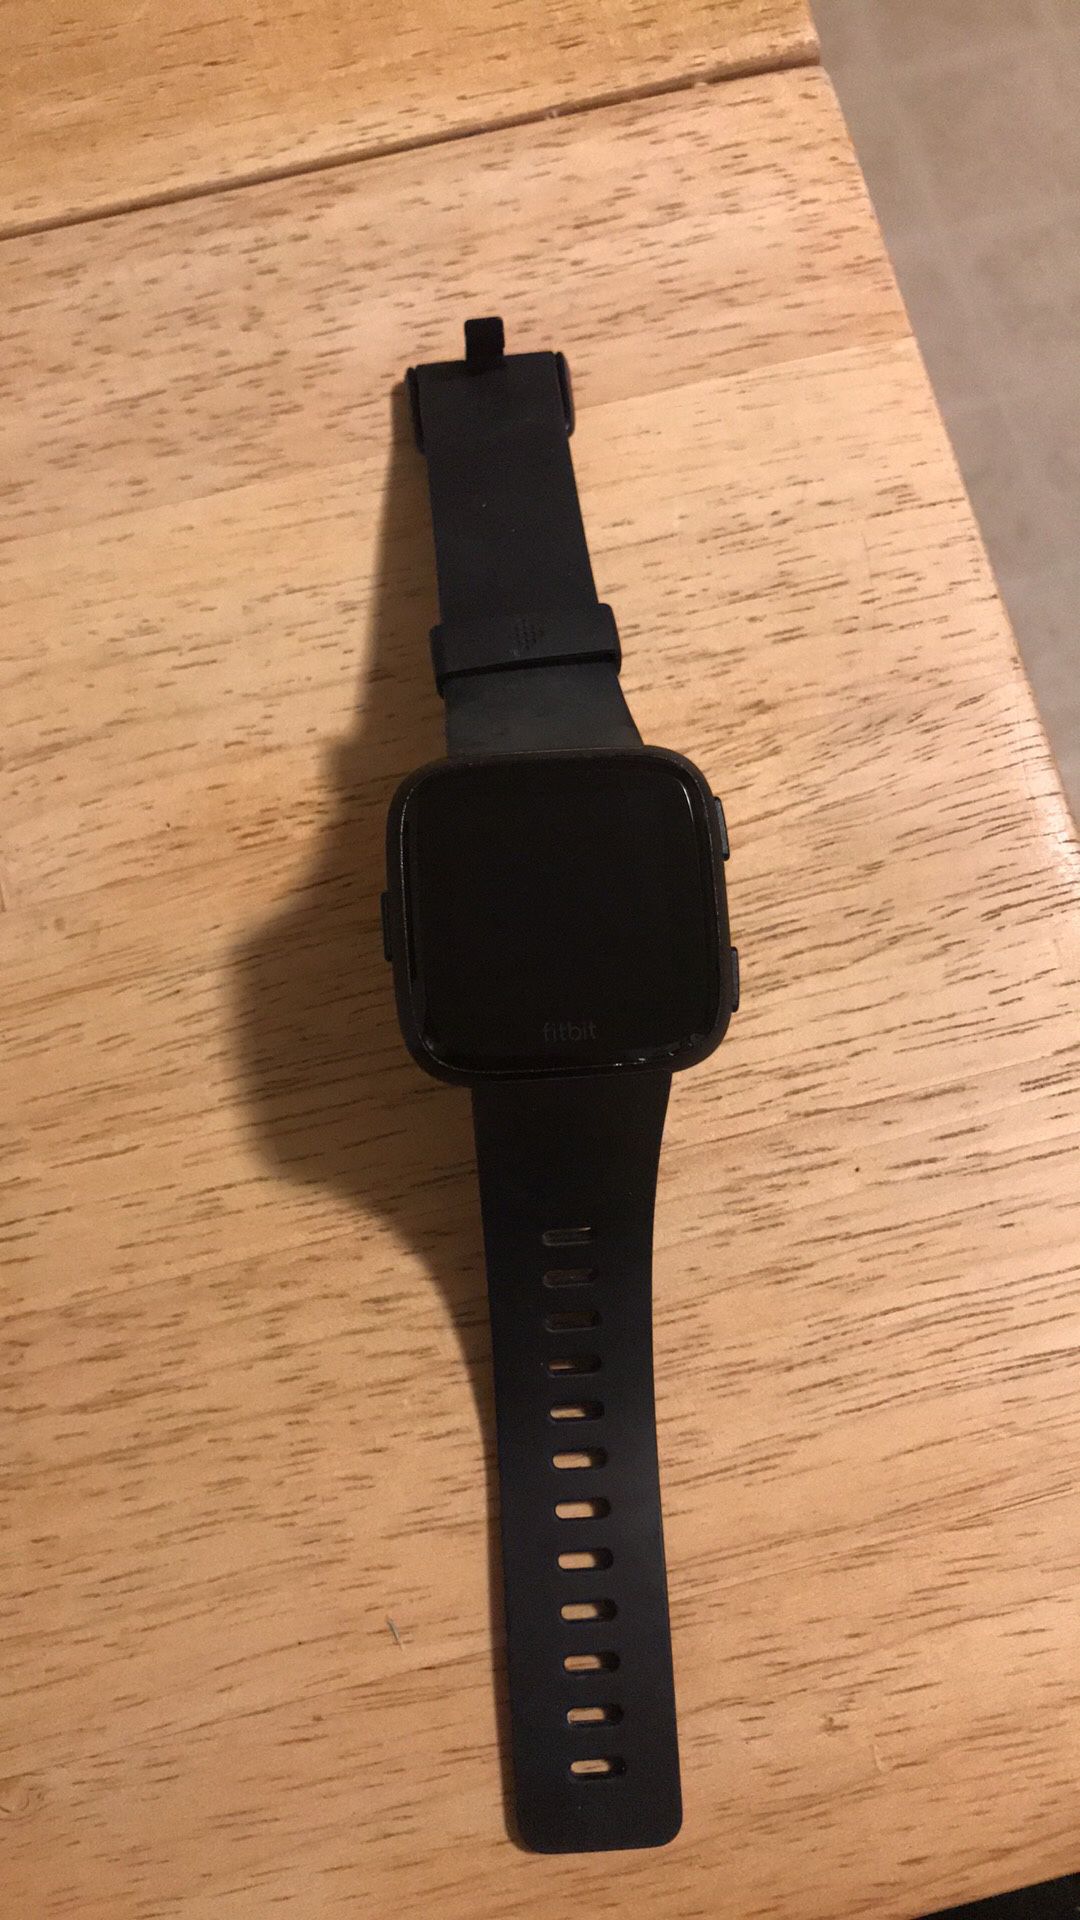 Fitbit Versa great condition